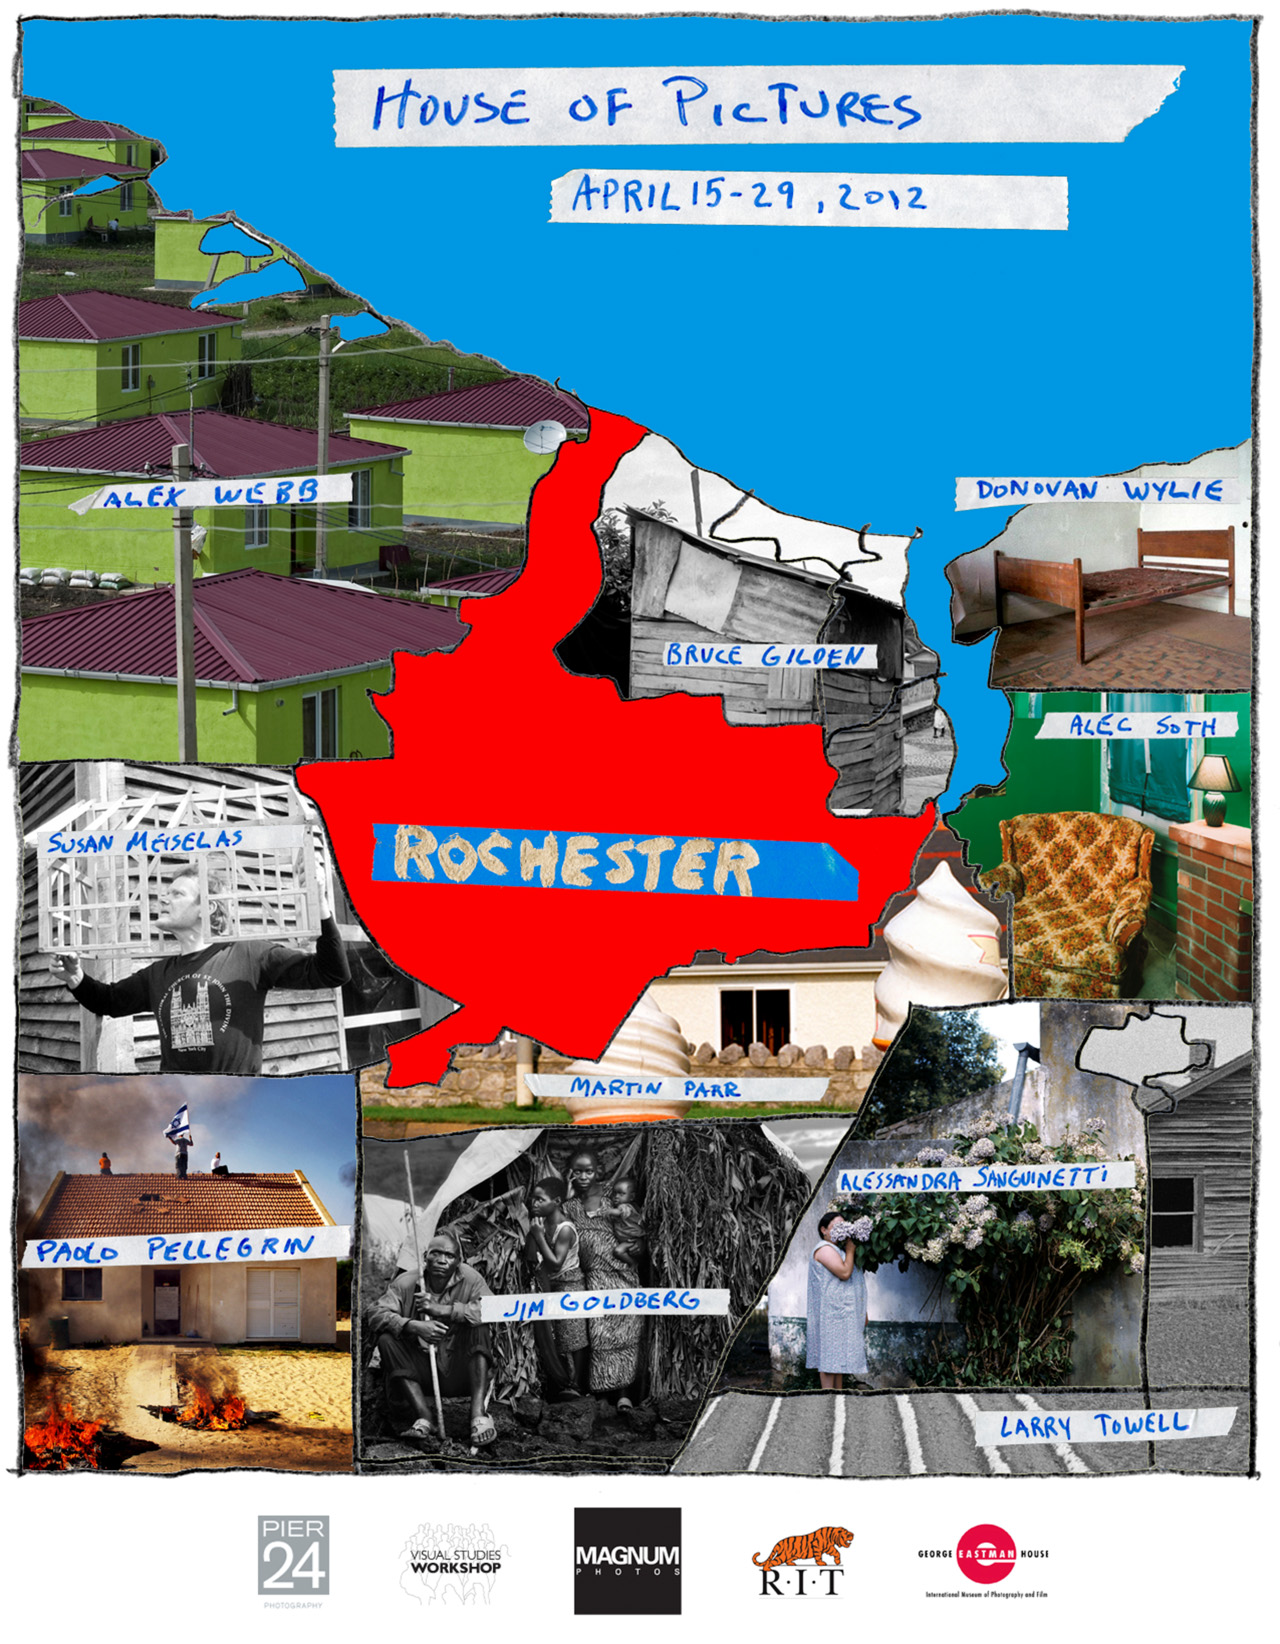 A Postcard From Rochester